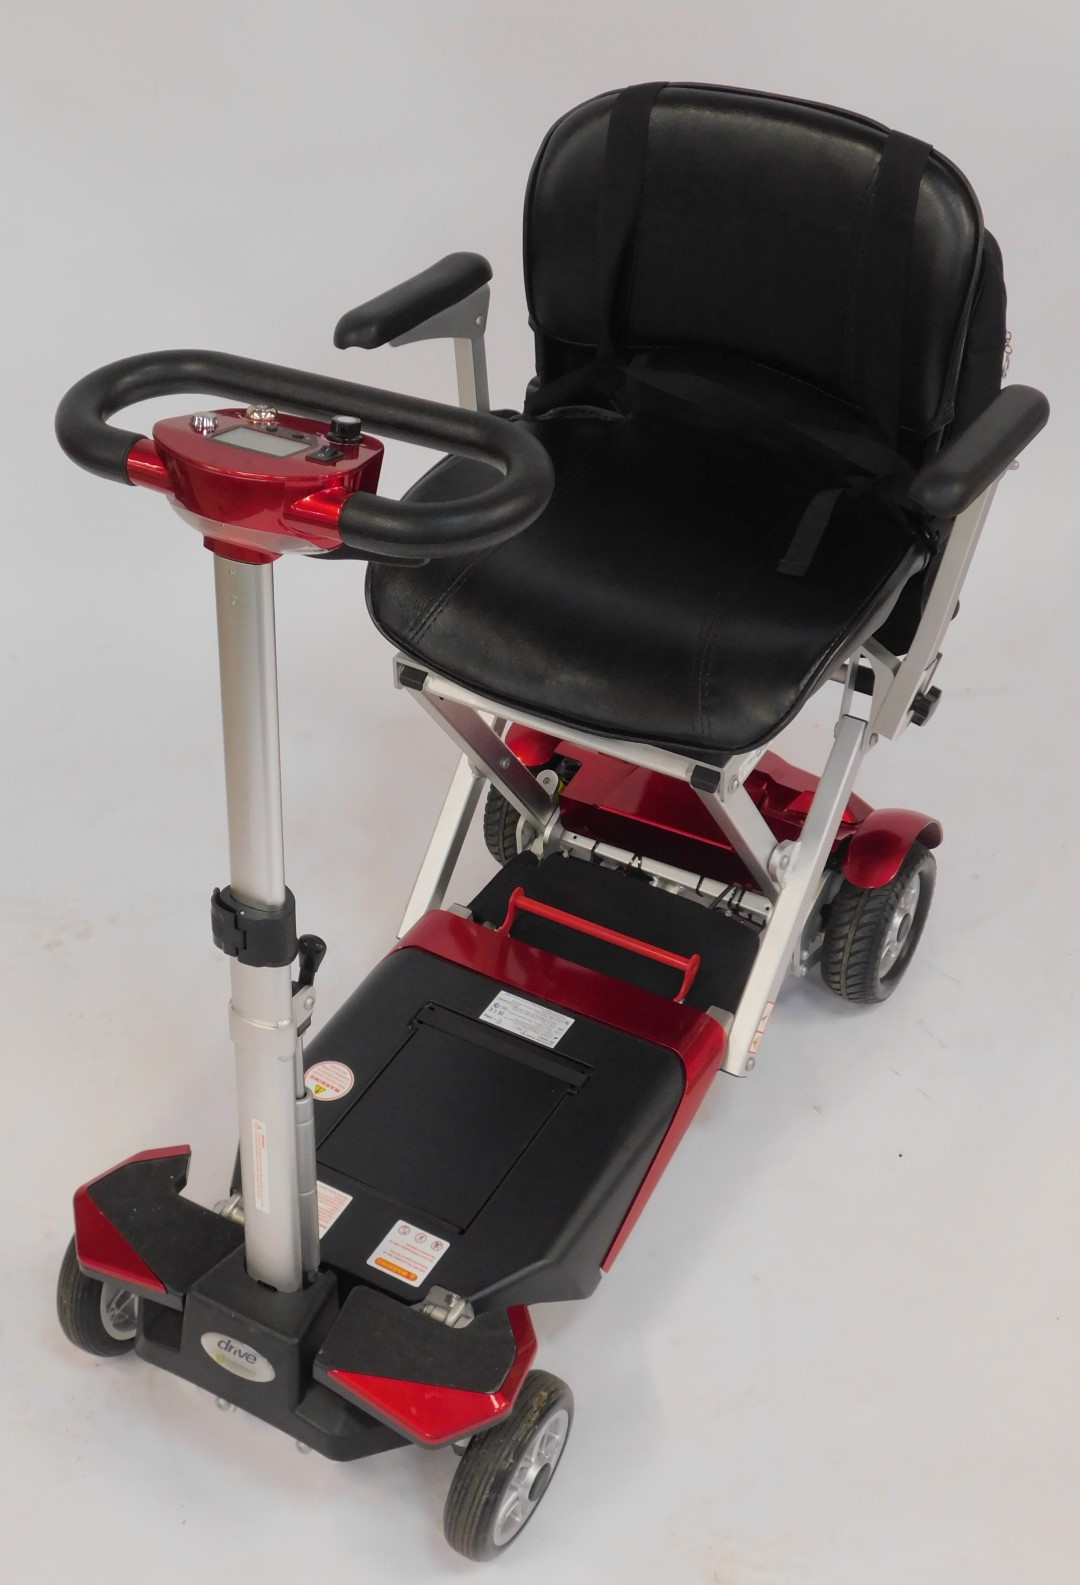 A Drive Auto Fold Elite scooter, in red, S3026-2. - Image 2 of 5